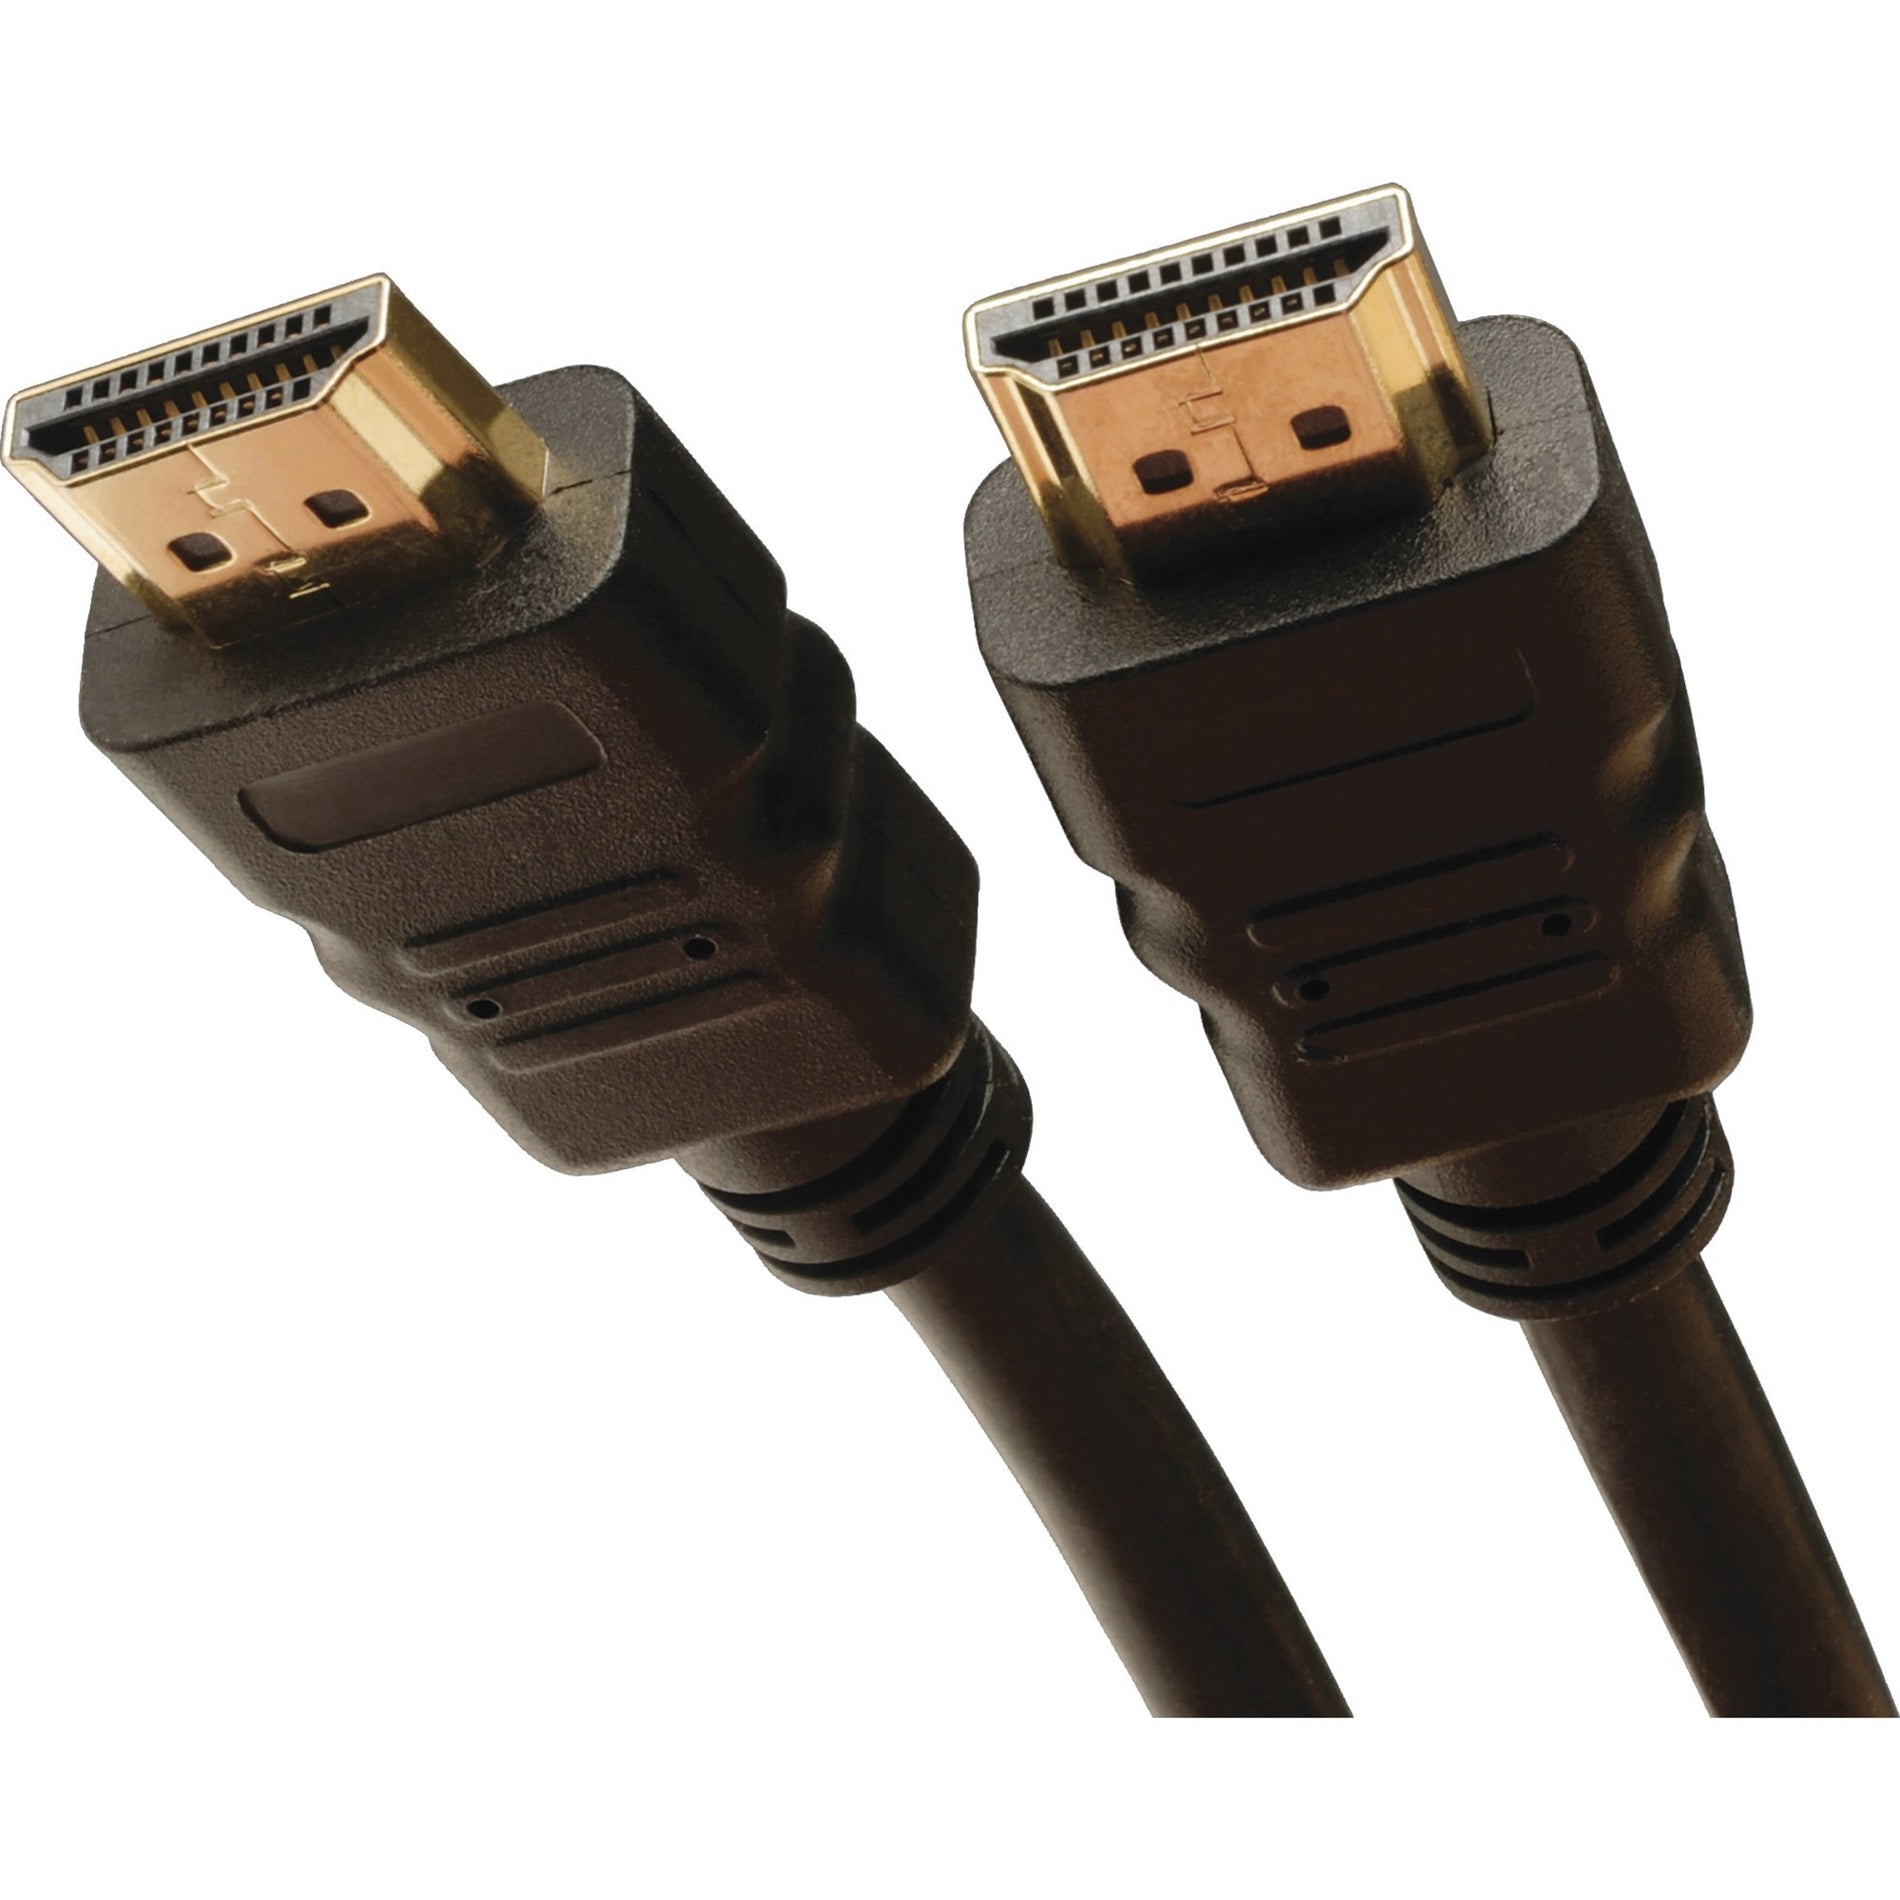 Tripp Lite P569-025 High Speed HDMI Cable with Ethernet, 25 ft, Molded, Gold Plated Connectors, 18 Gbit/s Data Transfer Rate, 3840 x 2160 Supported Resolution